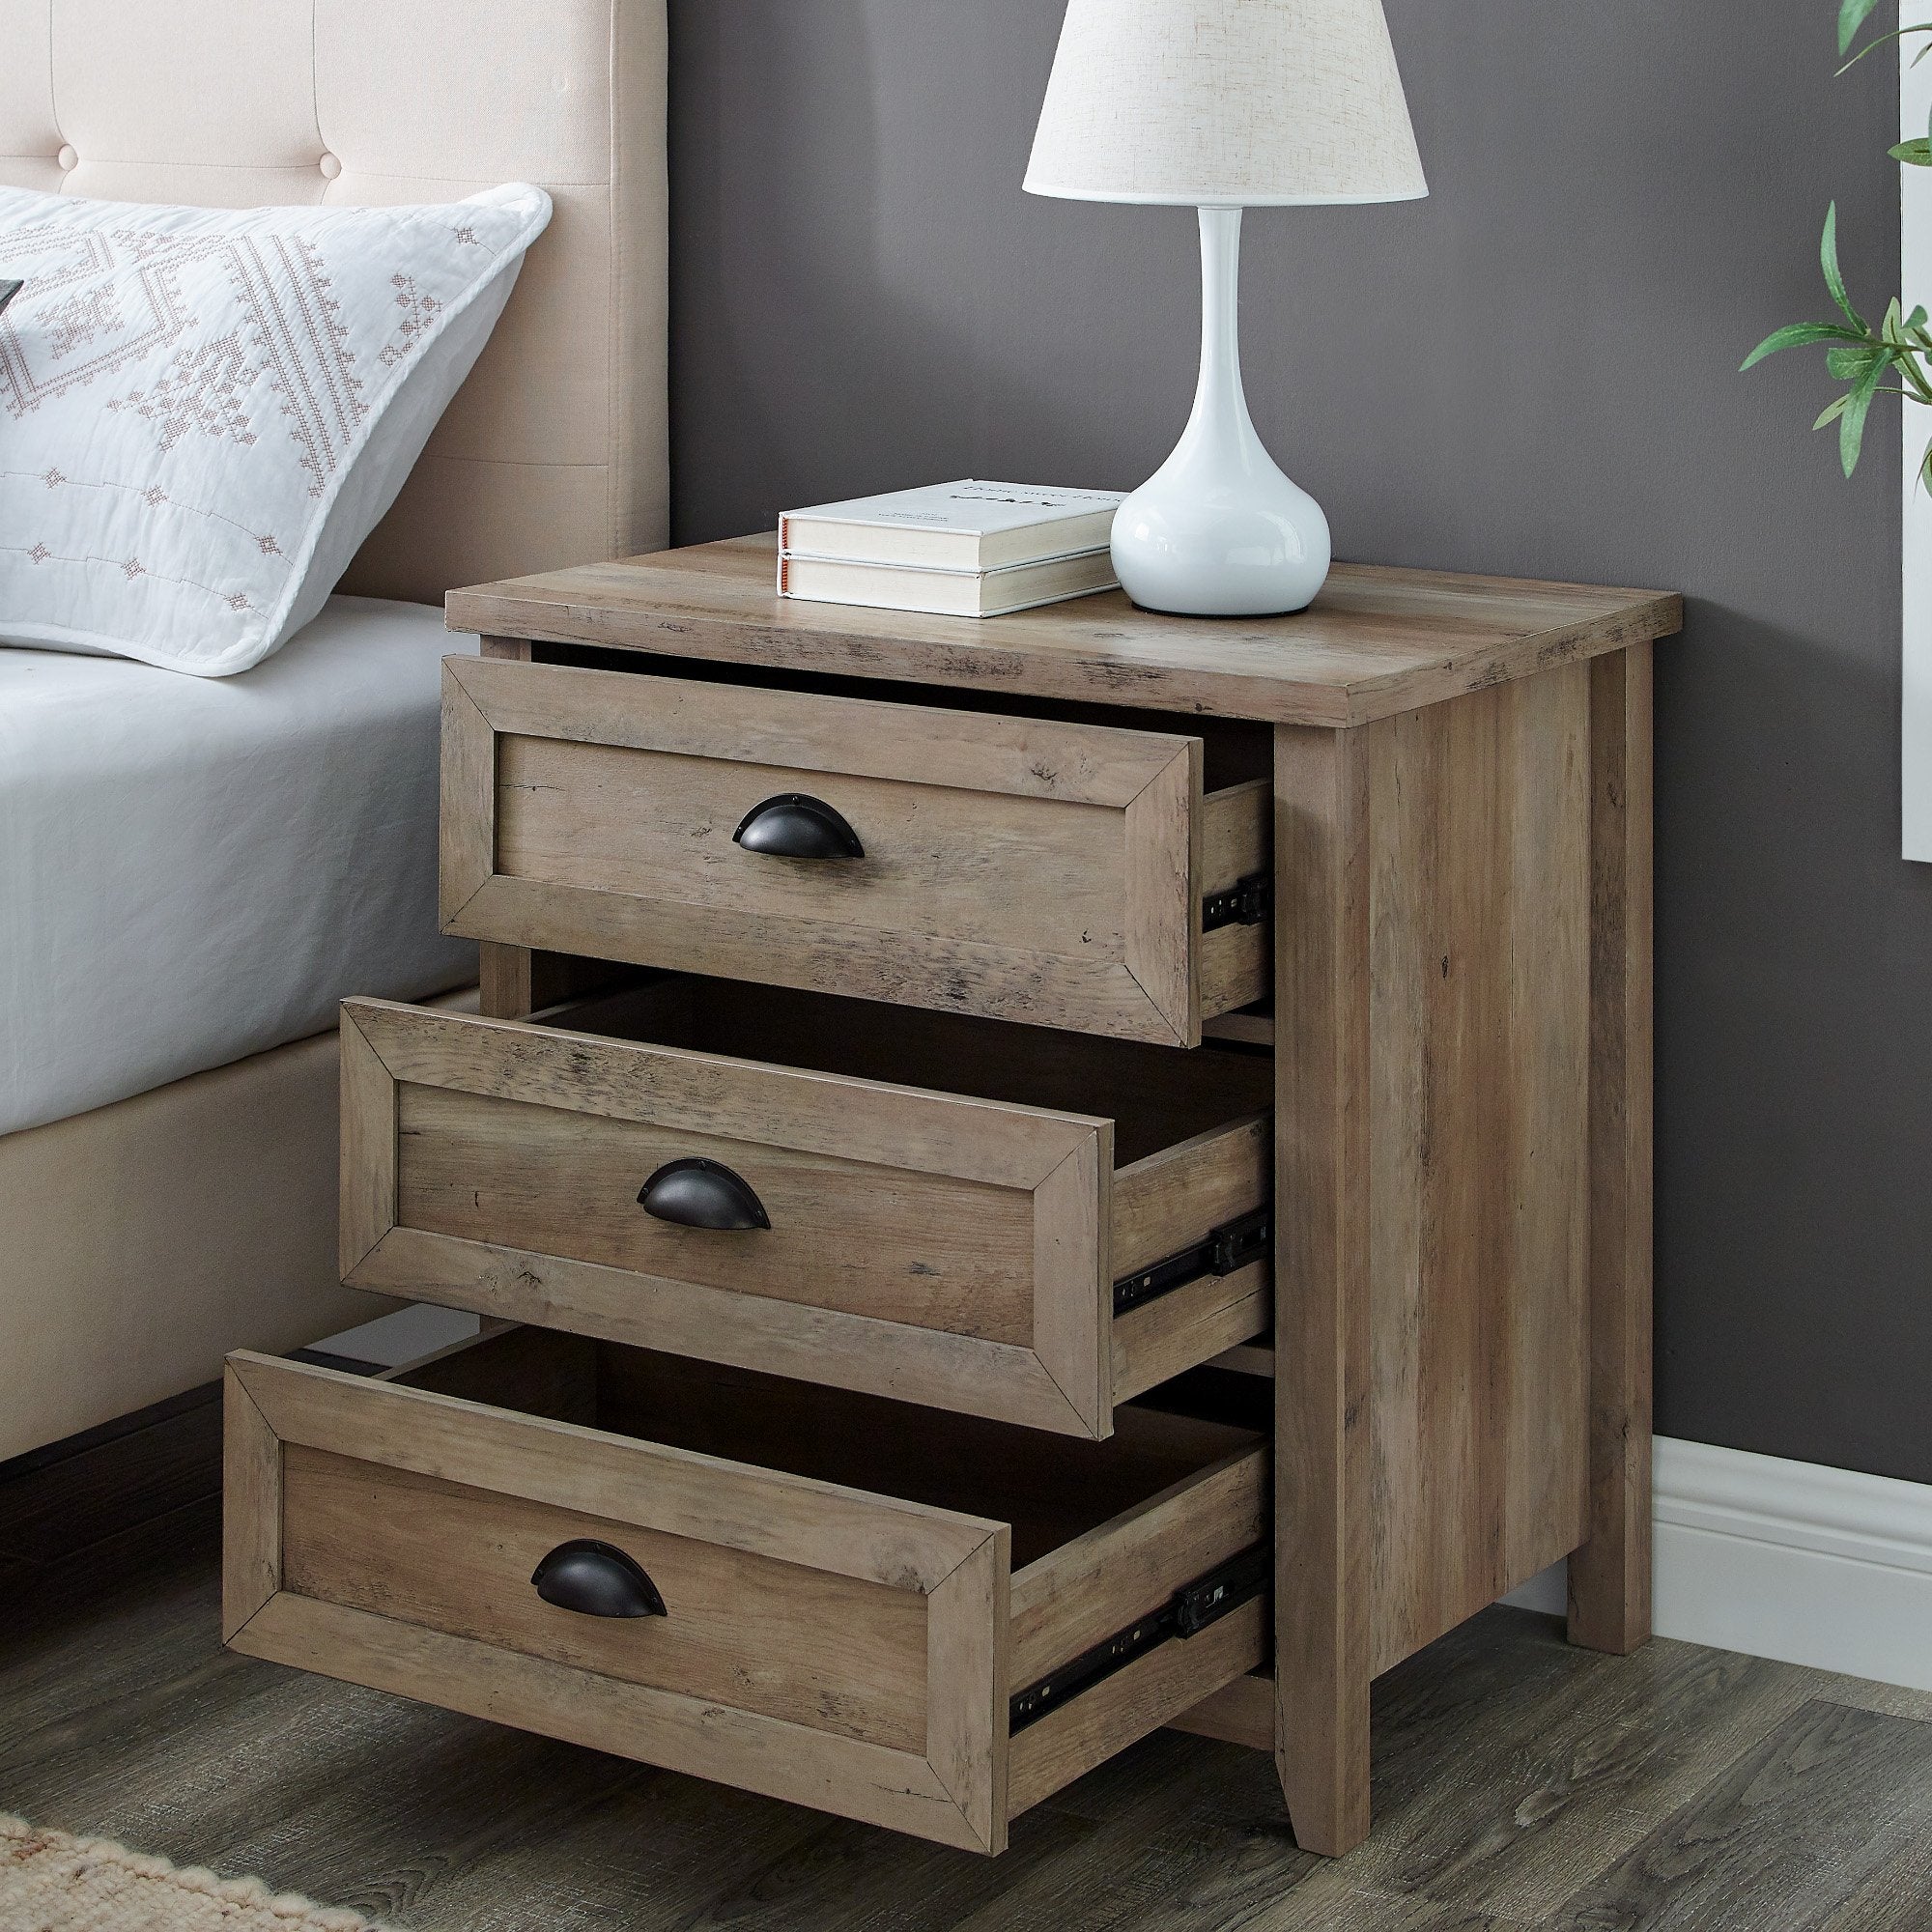 Odette Transitional Farmhouse Collection (Dresser or Nightstand)